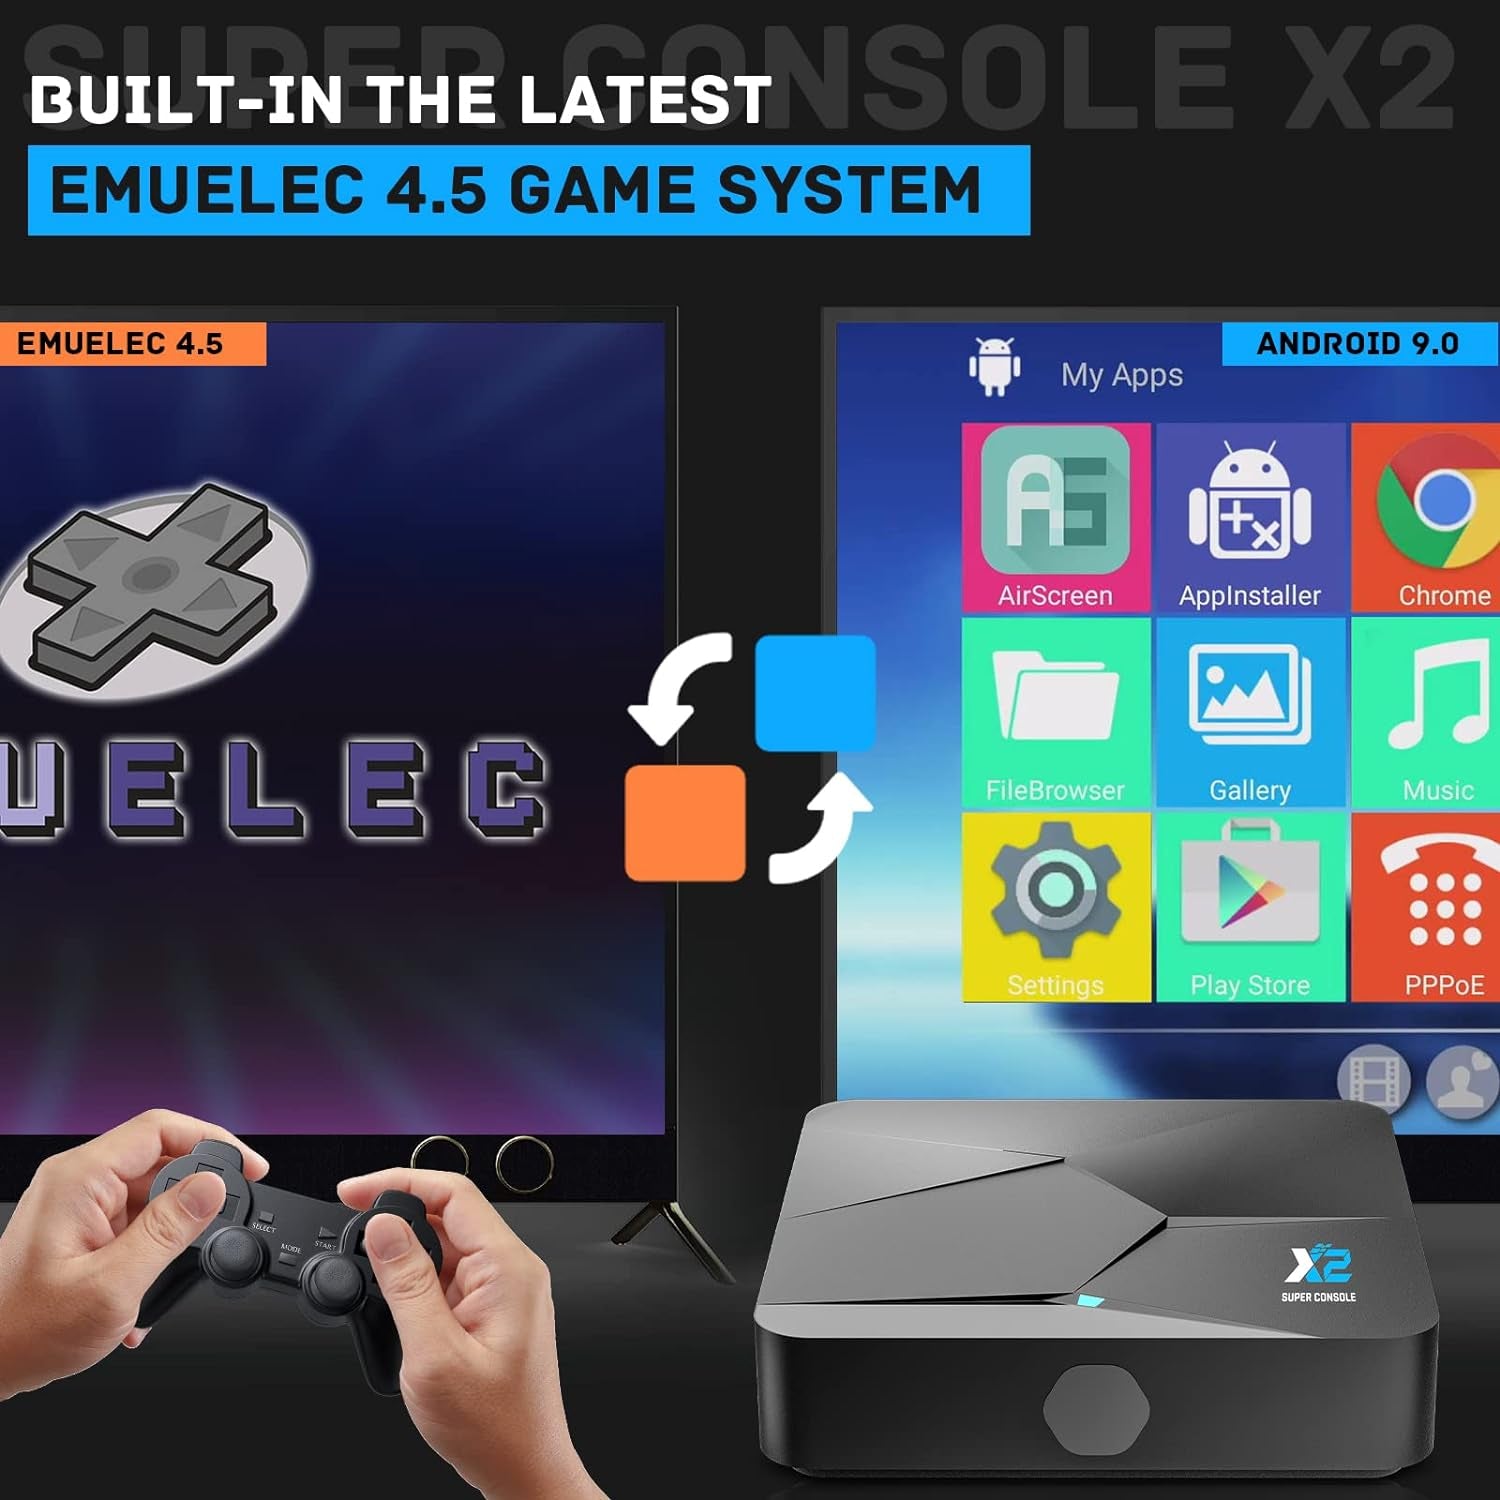 Super Console X2 Retro Game Console Built-In 100000+ Games, Android 9.0/Emuelec 4.5 Game System, S905X2 Chip, 4K UHD Output,2.4G/5G, BT 5.0